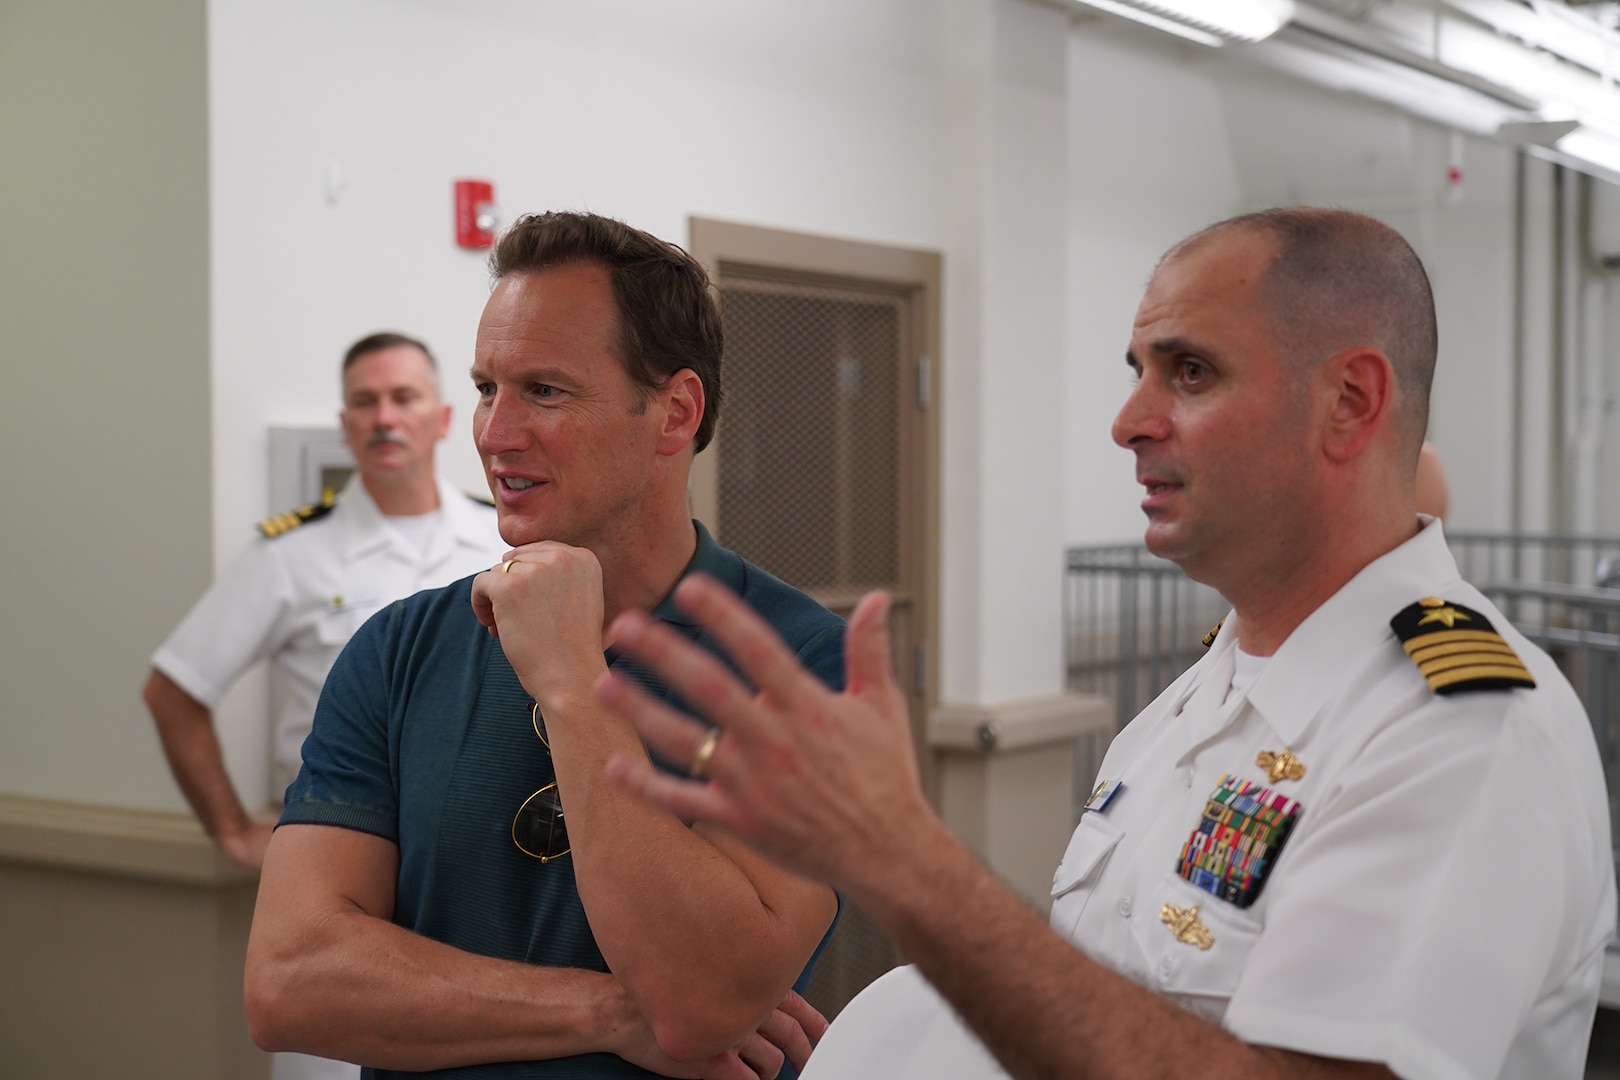 U.S. PACFLT Director of Intelligence and Information Operations Capt. Tony Butera, considered the current equivalent of World War II intelligence officer Edwin Layton, walks actor Patrick Wilson through Station Hypo during a special tour of the now-declassified space.